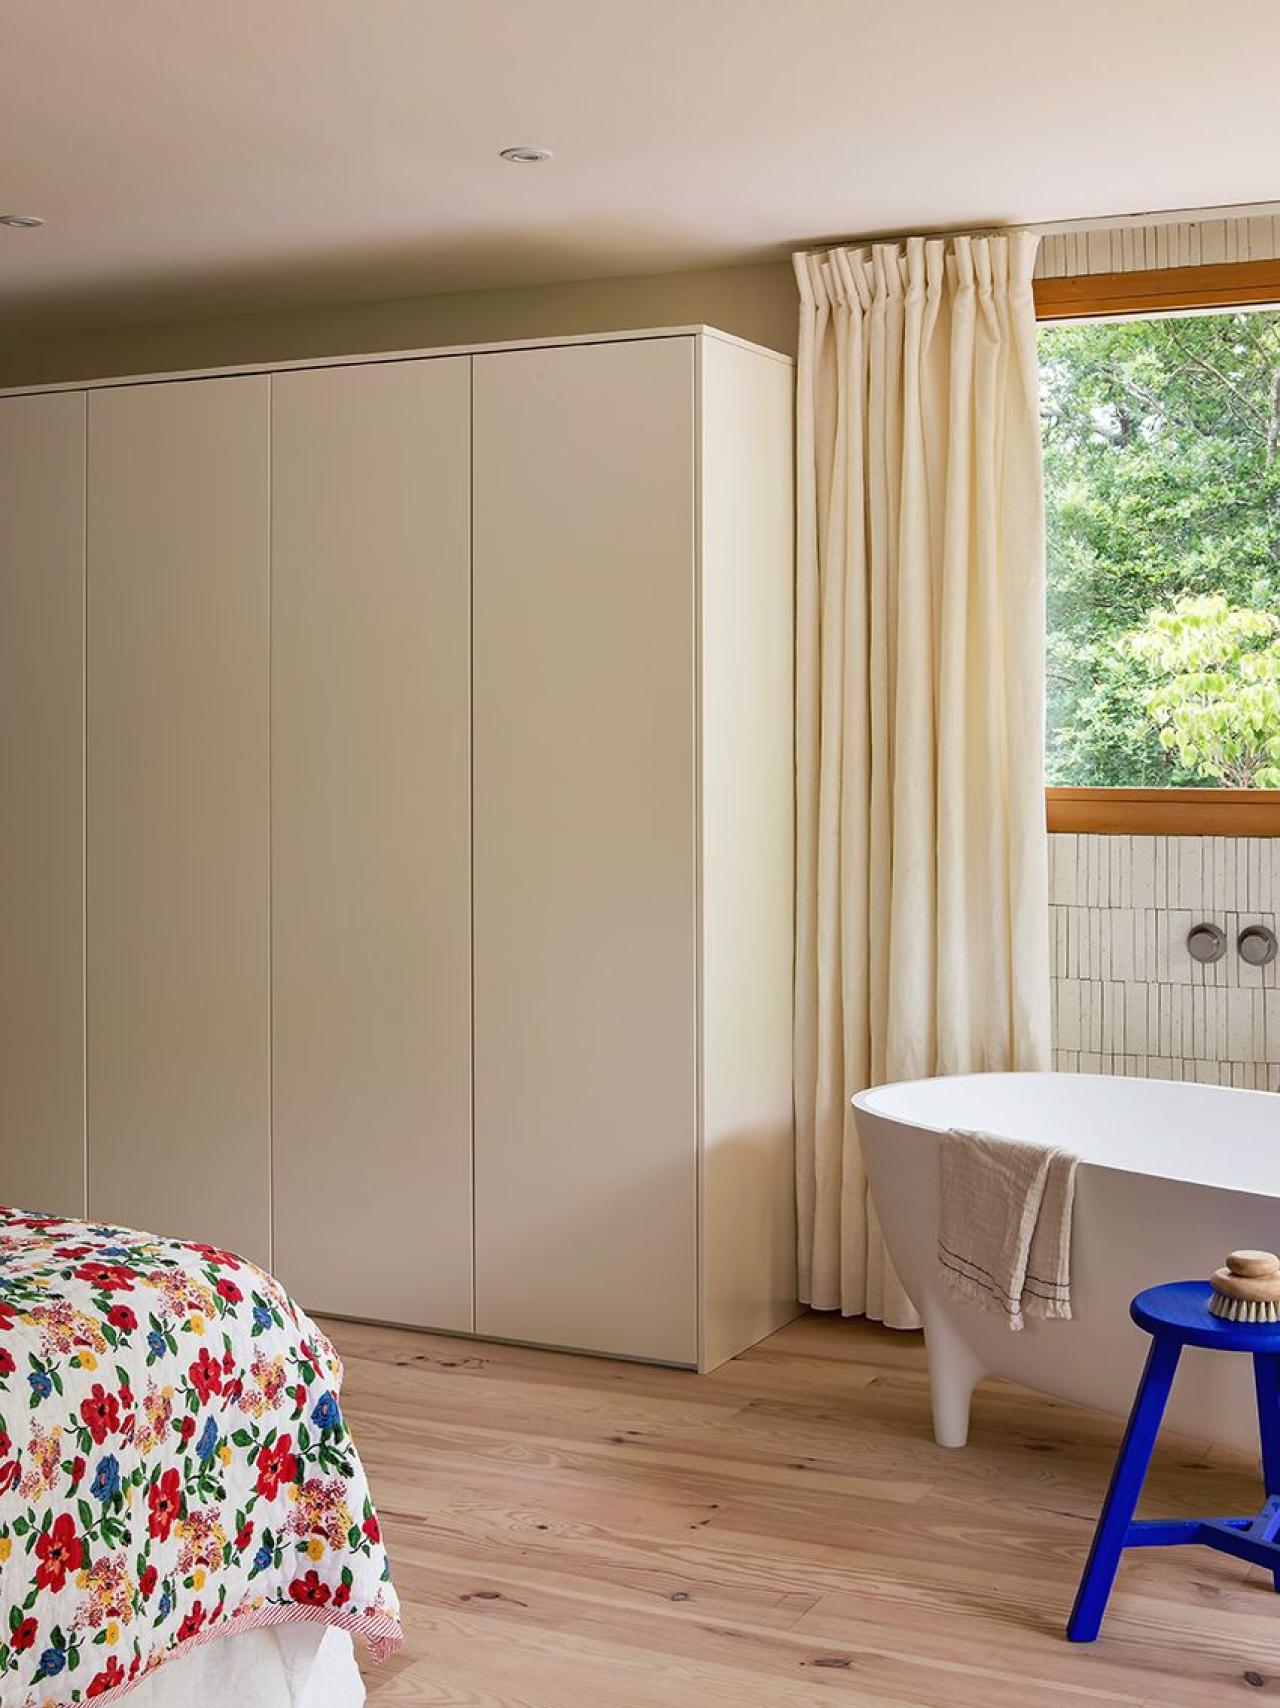 Bright bedroom with waxed concrete and Ivoire wardrobes and bathtub